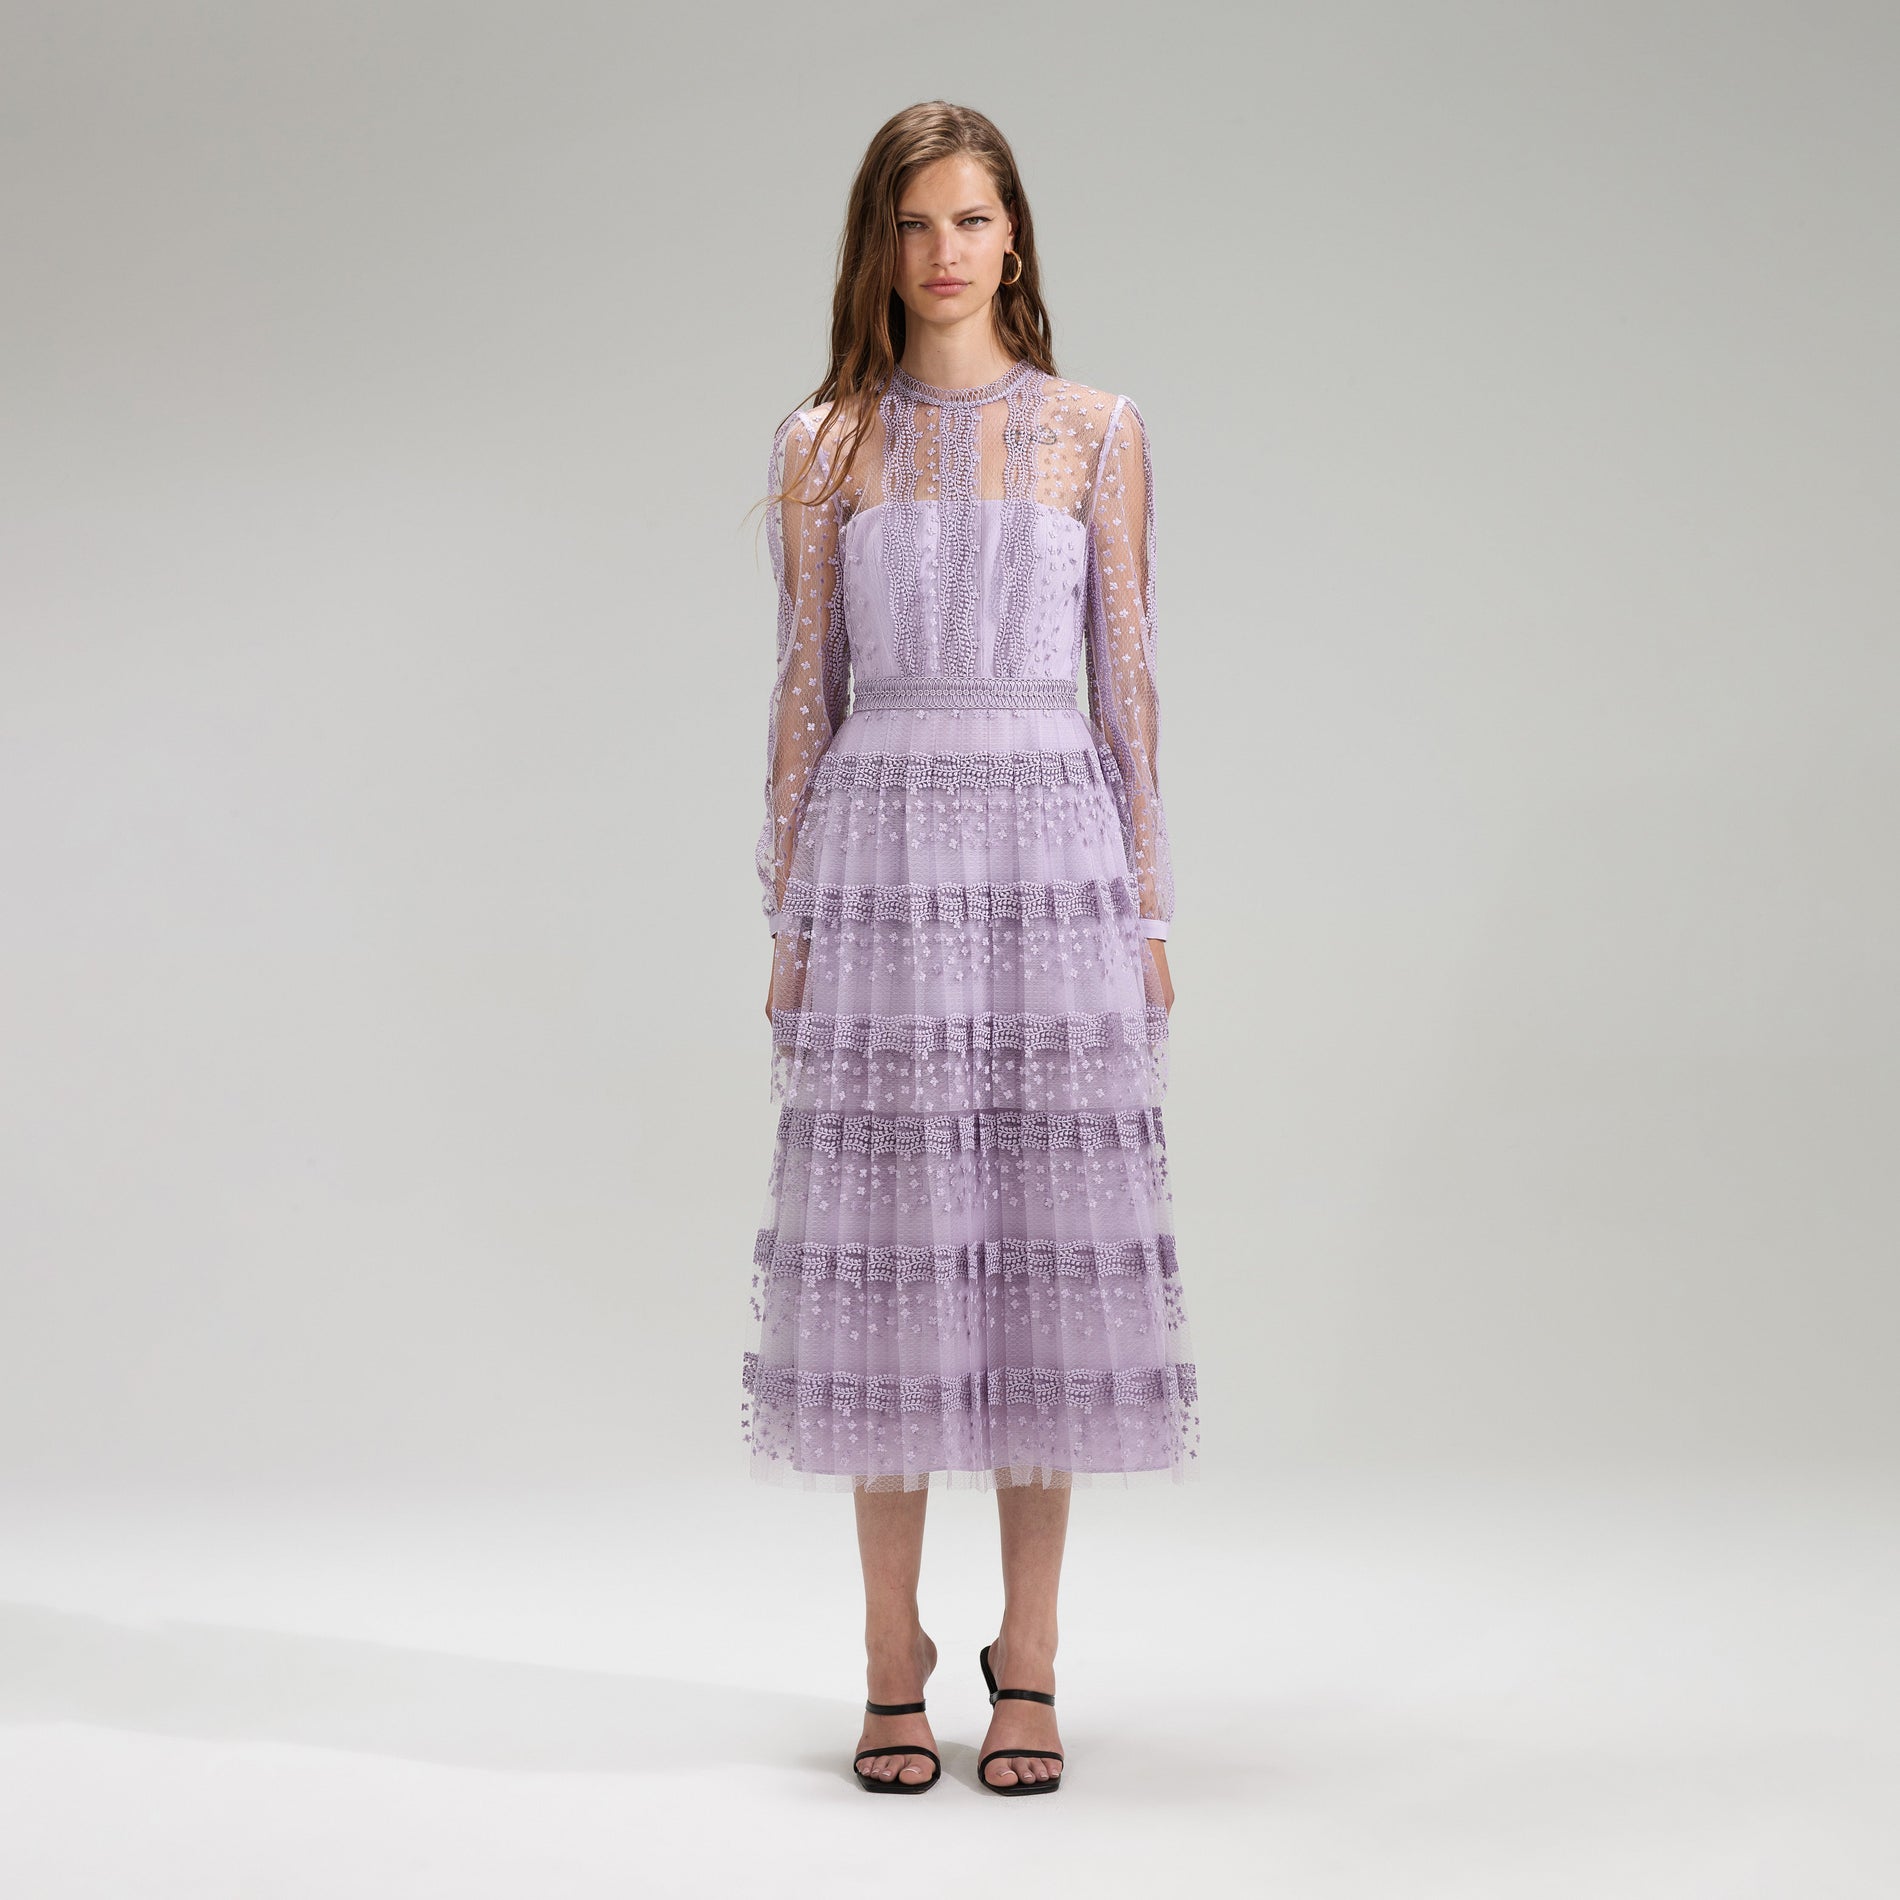 A woman wearing the Lilac Tiered Lace Midi Dress